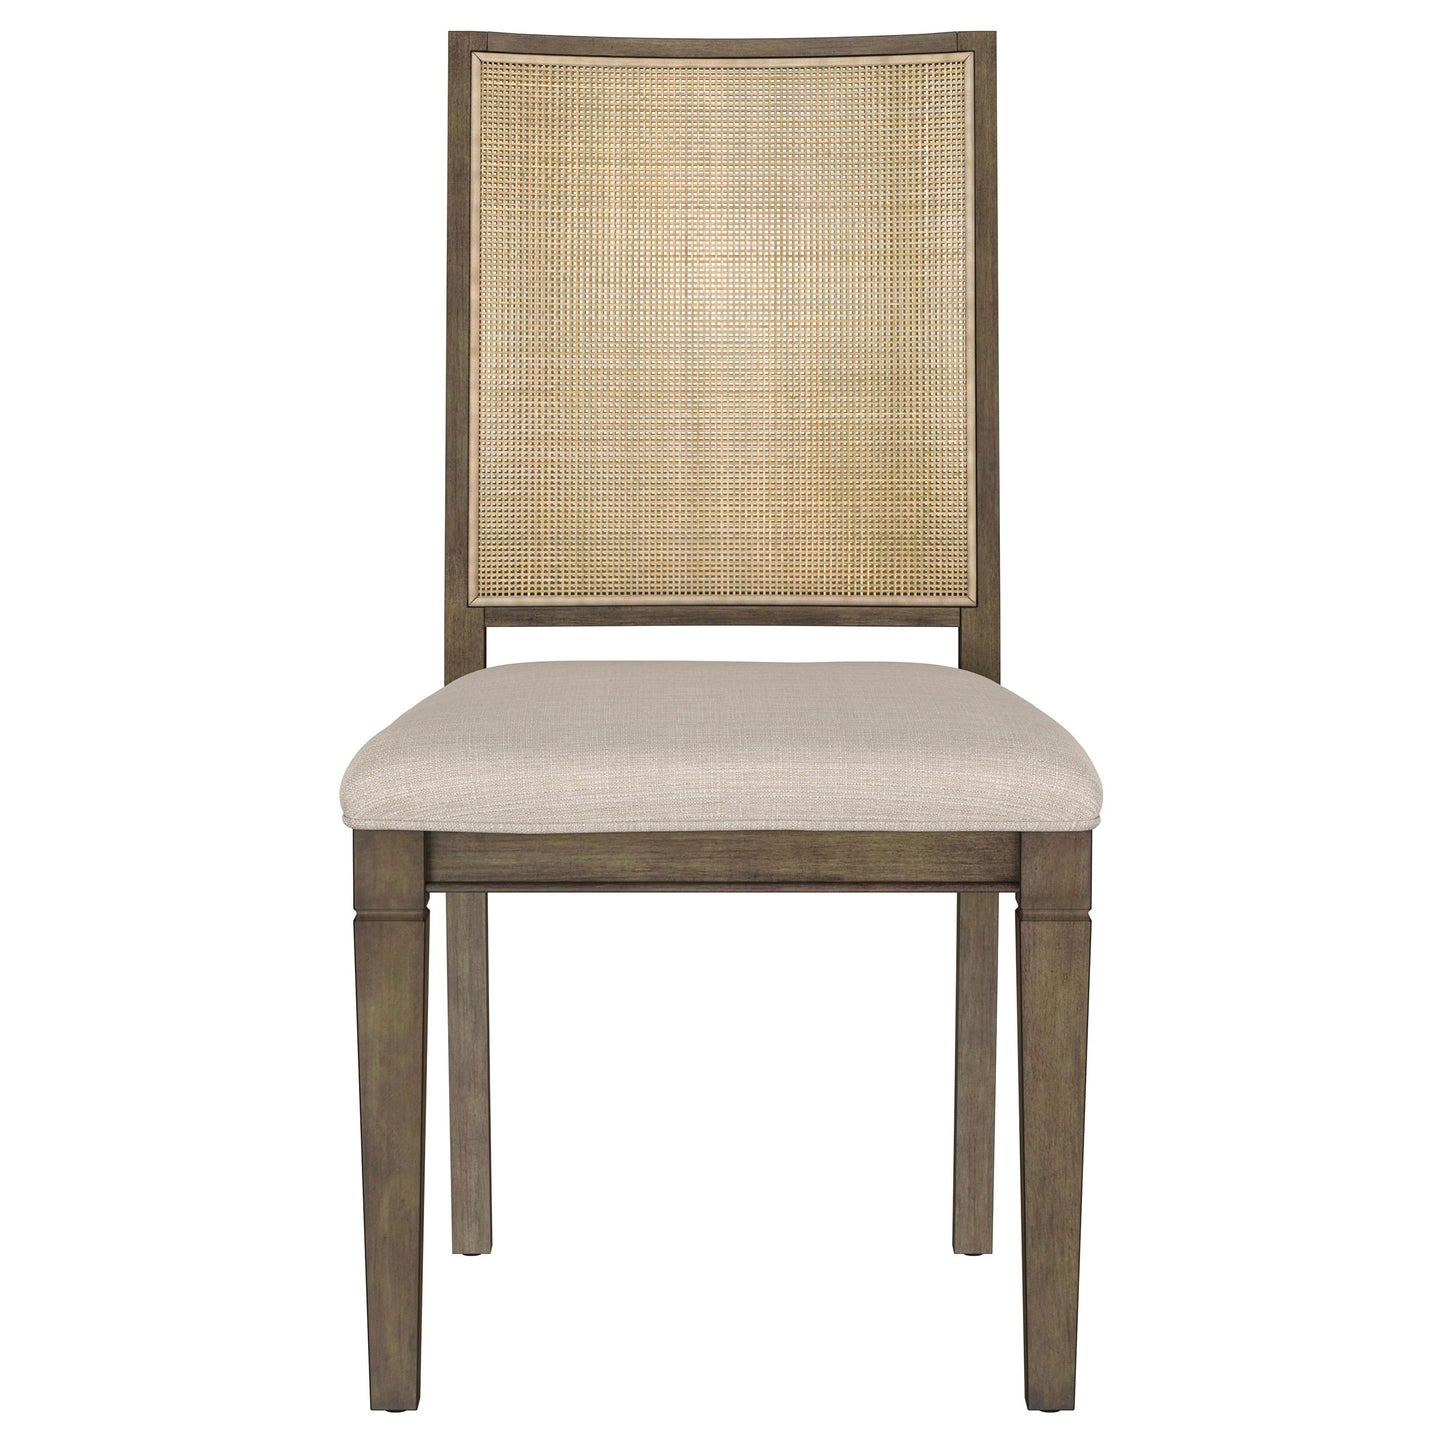 Matisse Woven Rattan Back Dining Side Chair Brown (Set of 2)